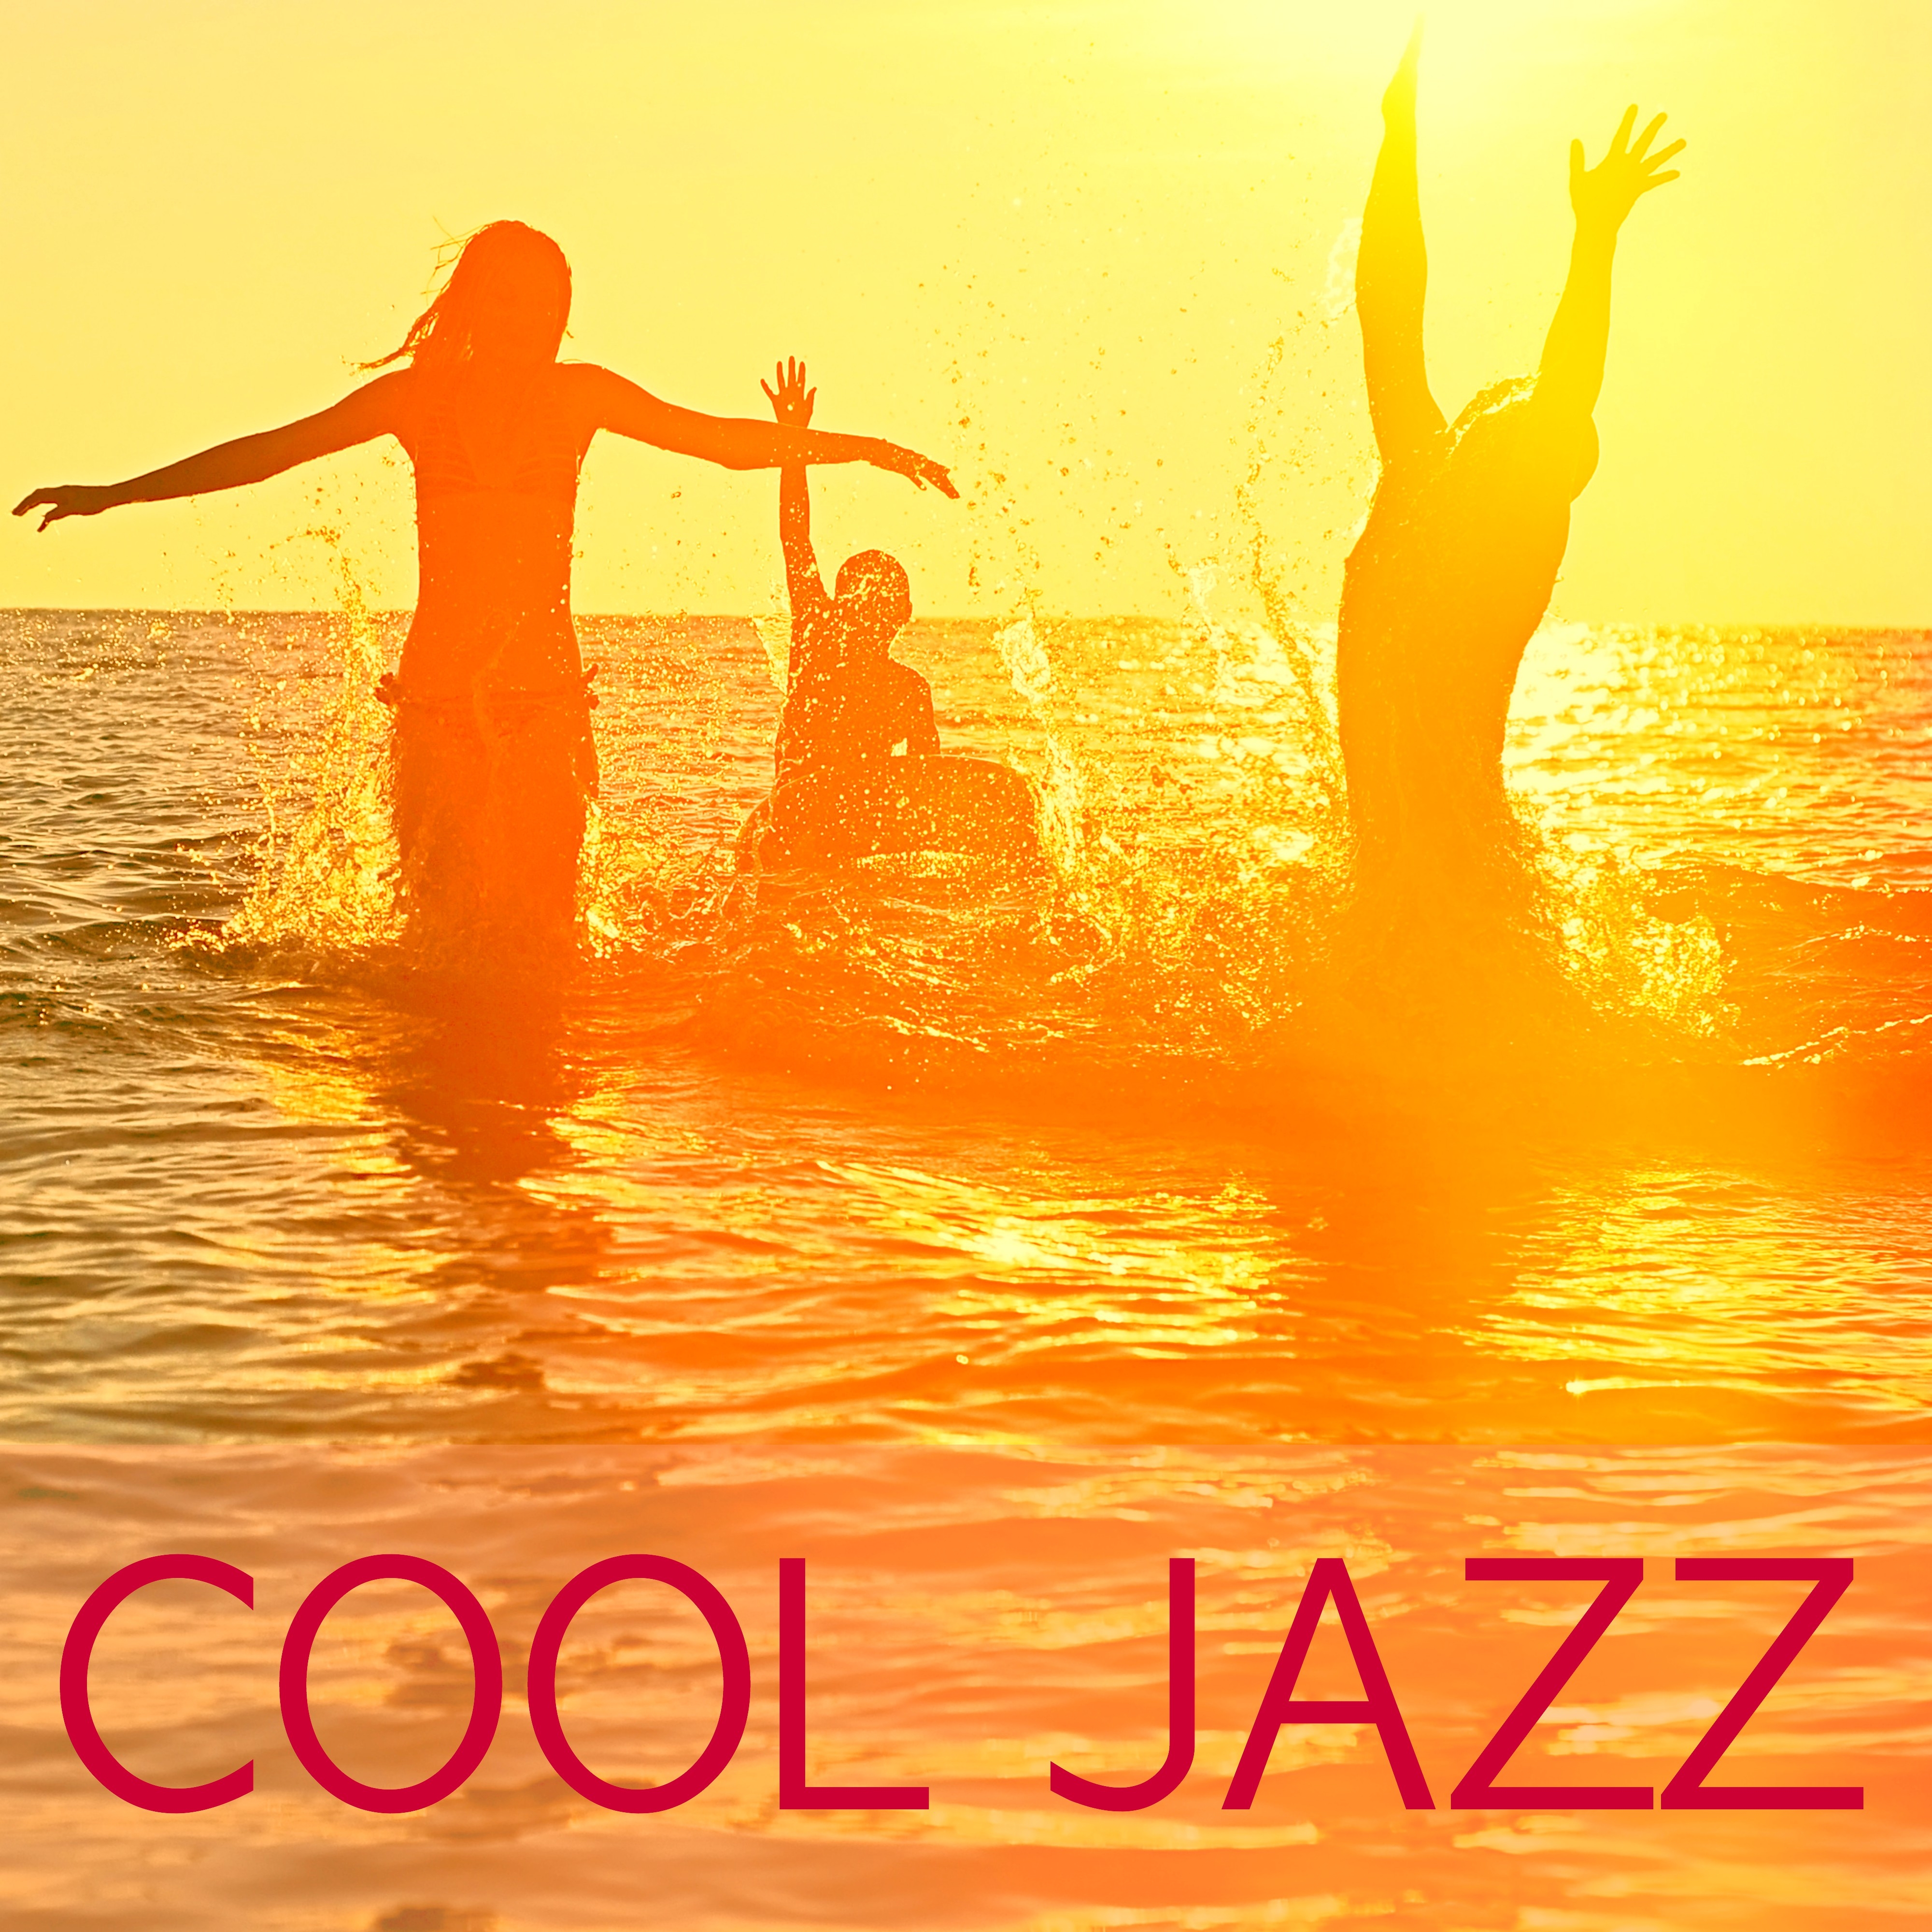 Cool Jazz - Cool Jazz Music Club, Big Band jazz for Party Night